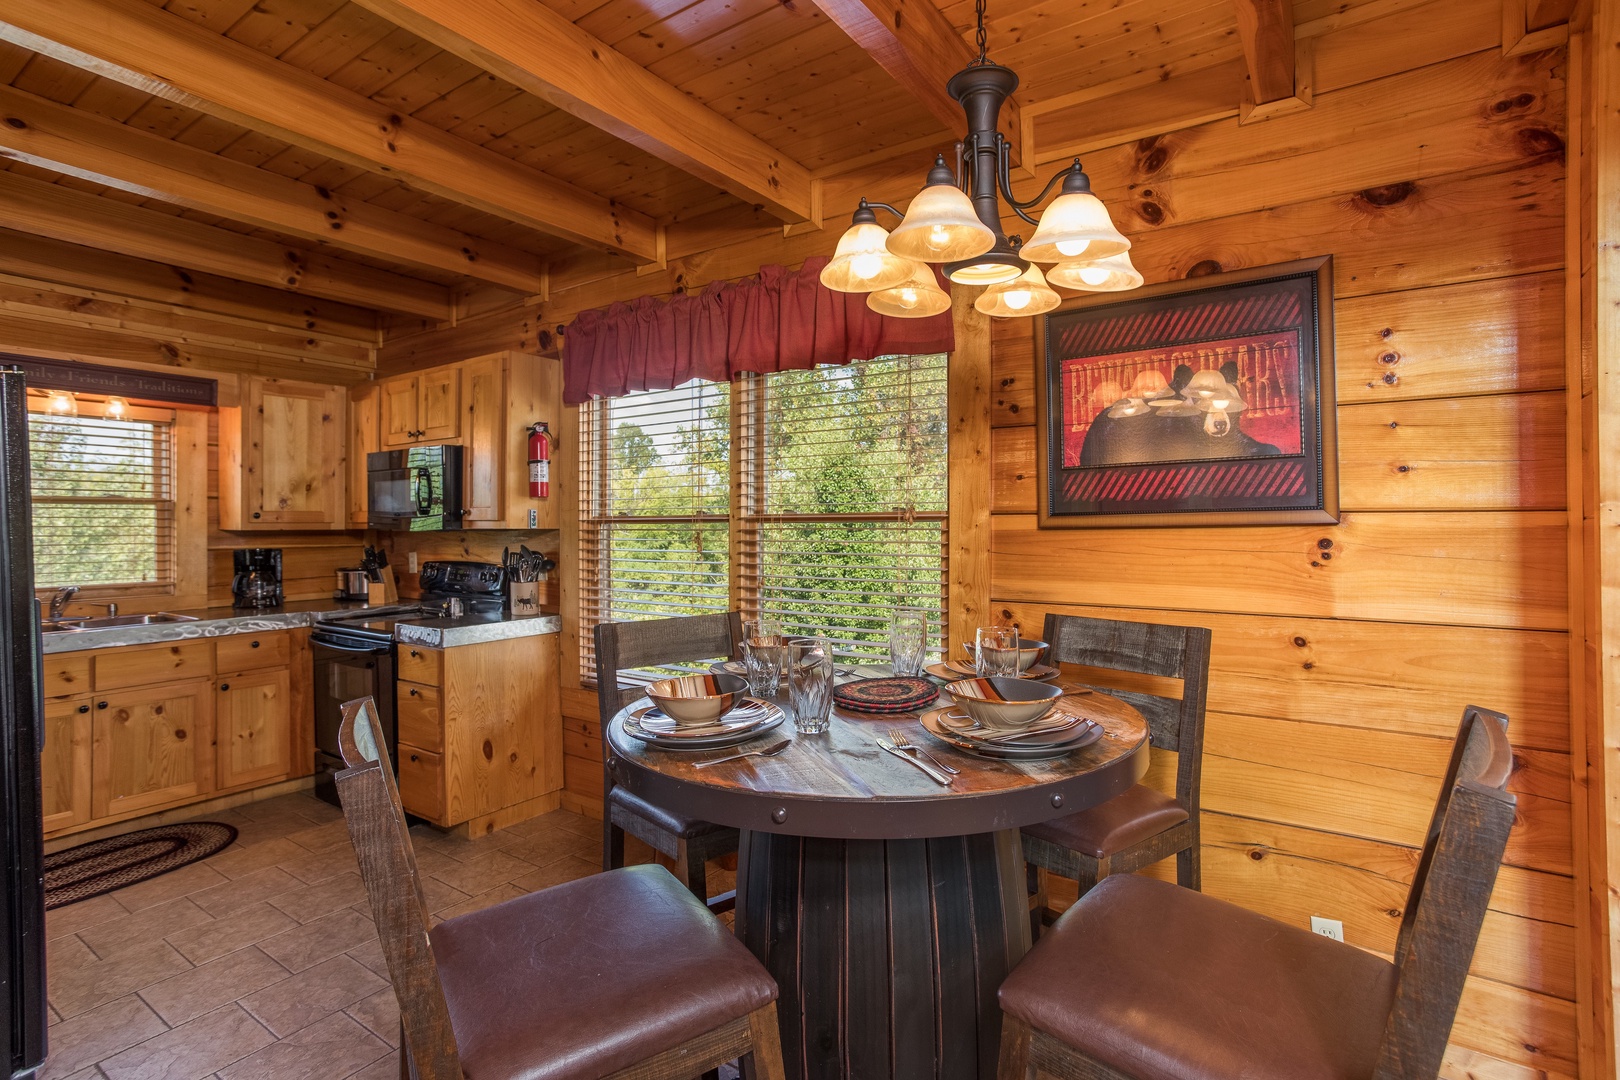 Dining table for 4 in the kitchen at Graceland, a 4-bedroom cabin rental located in Pigeon Forge